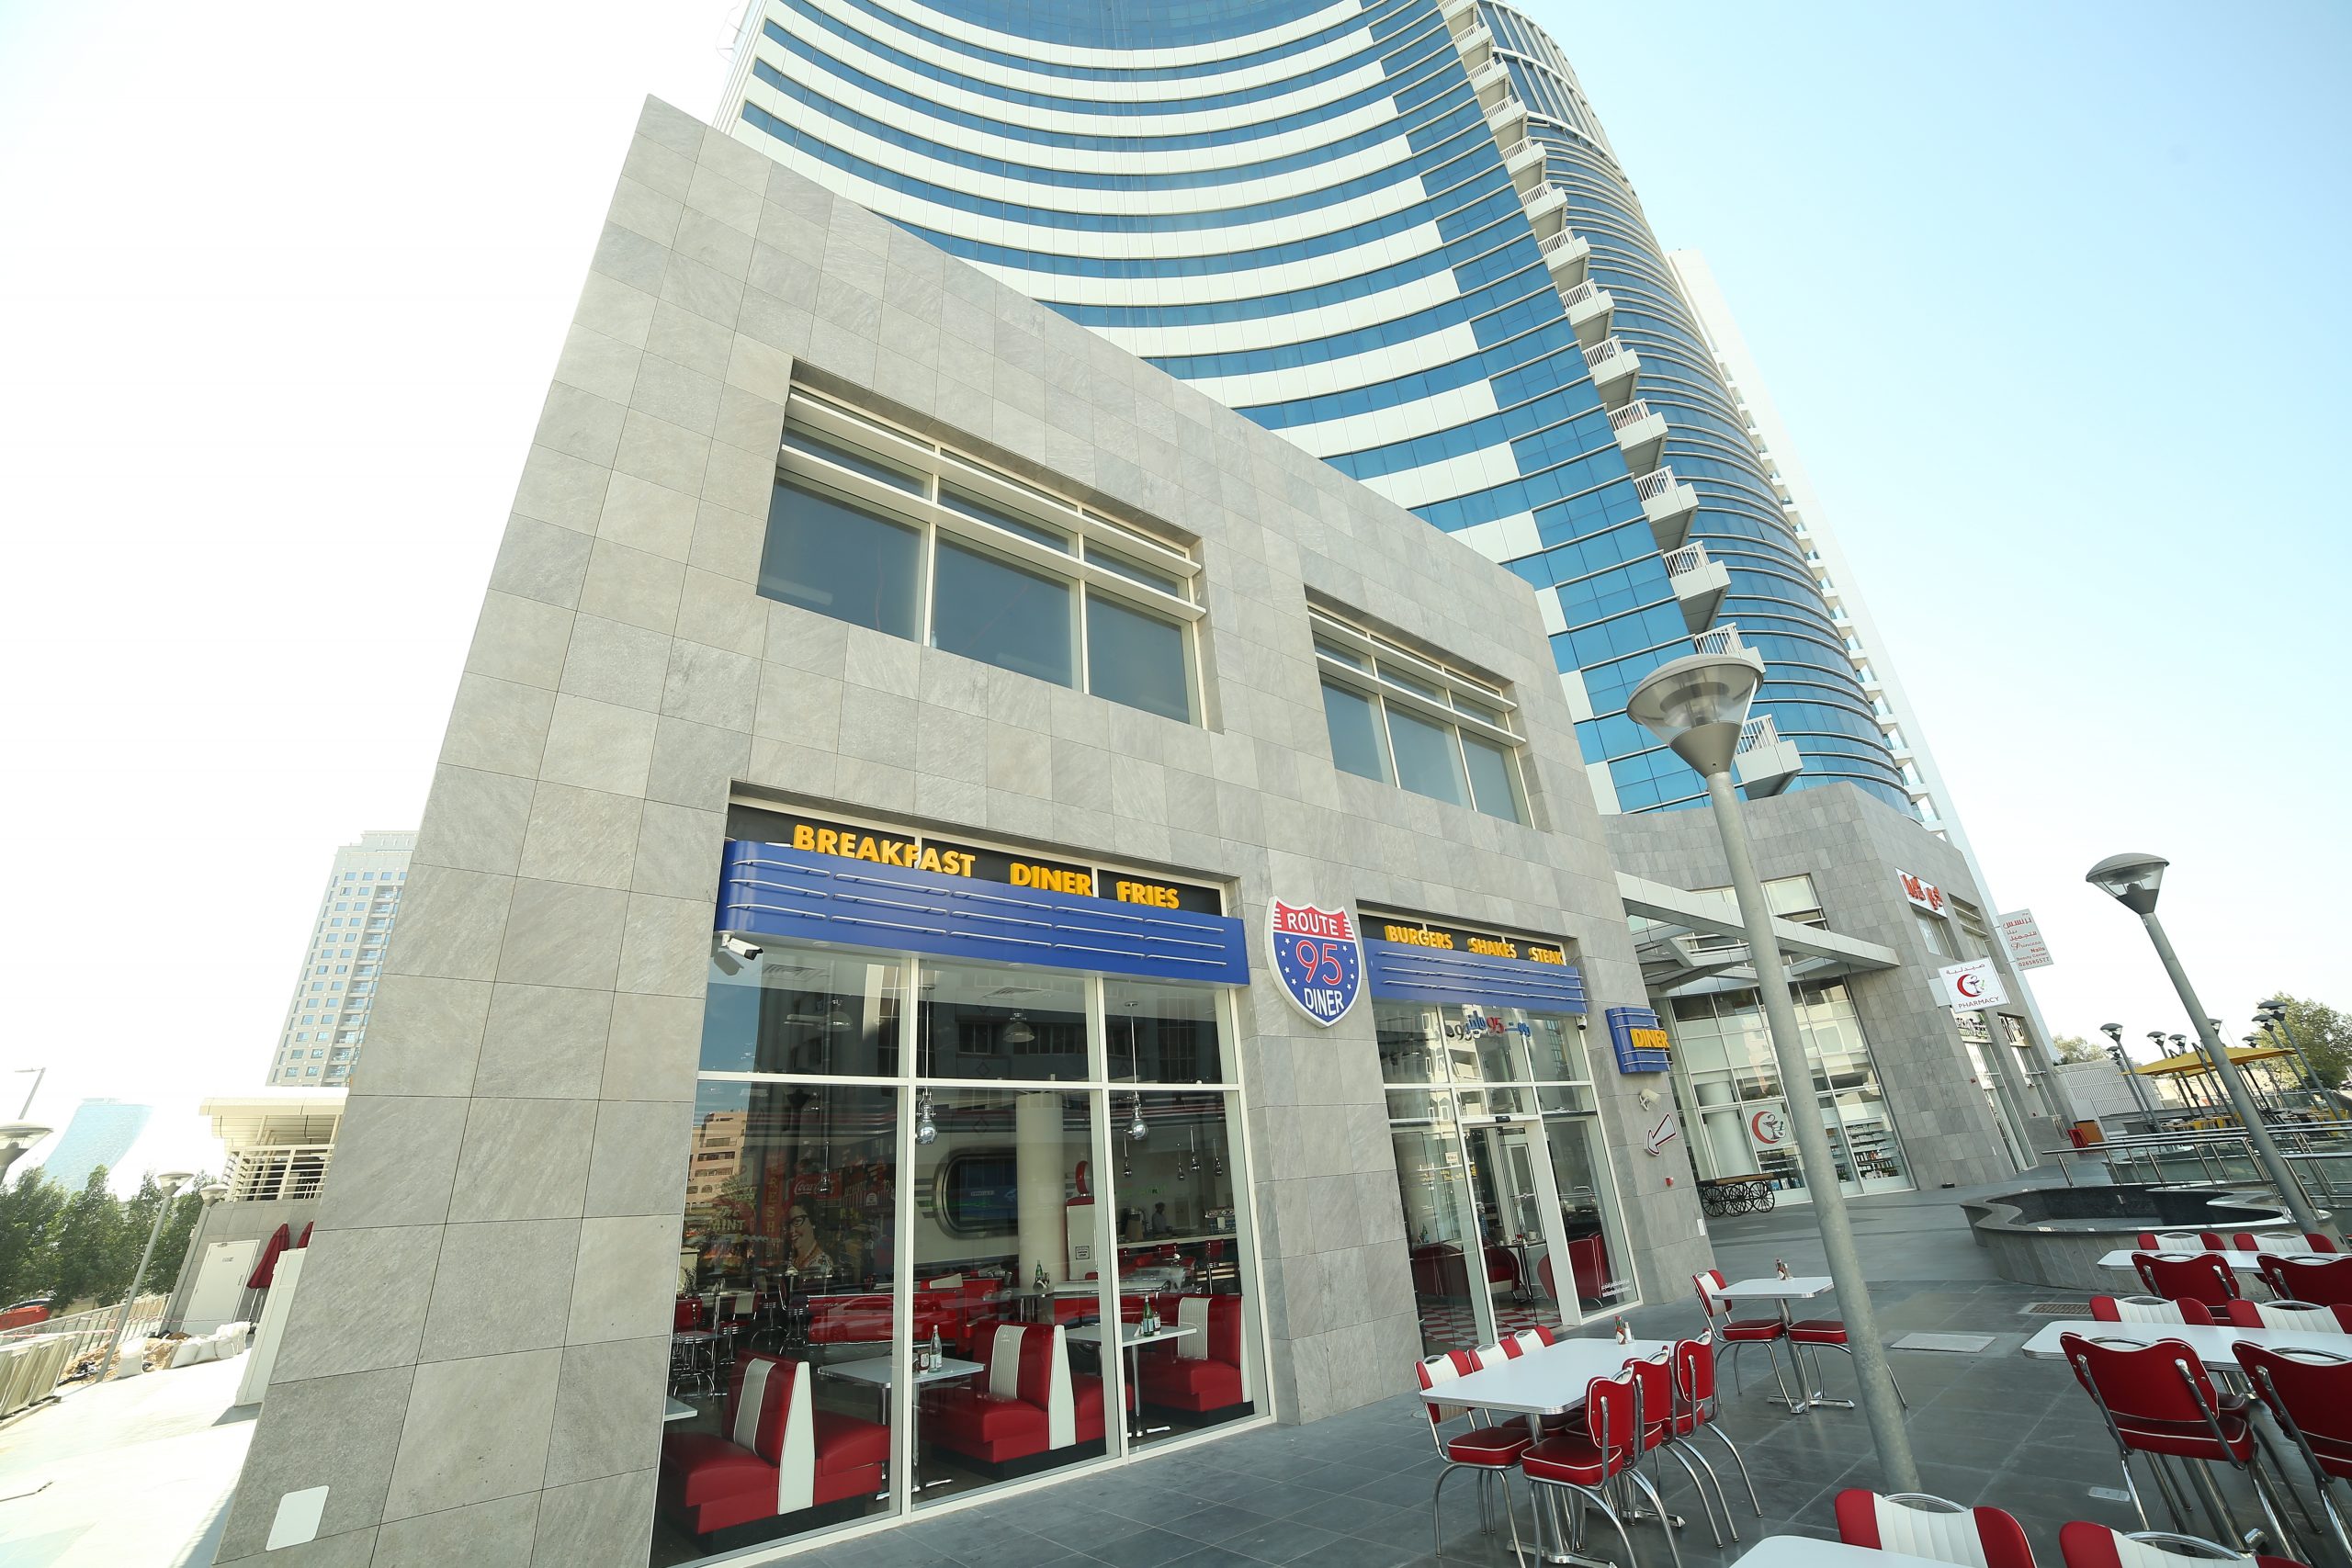 American Diner | Food & Beverages Interior Fit Out Company In Dubai